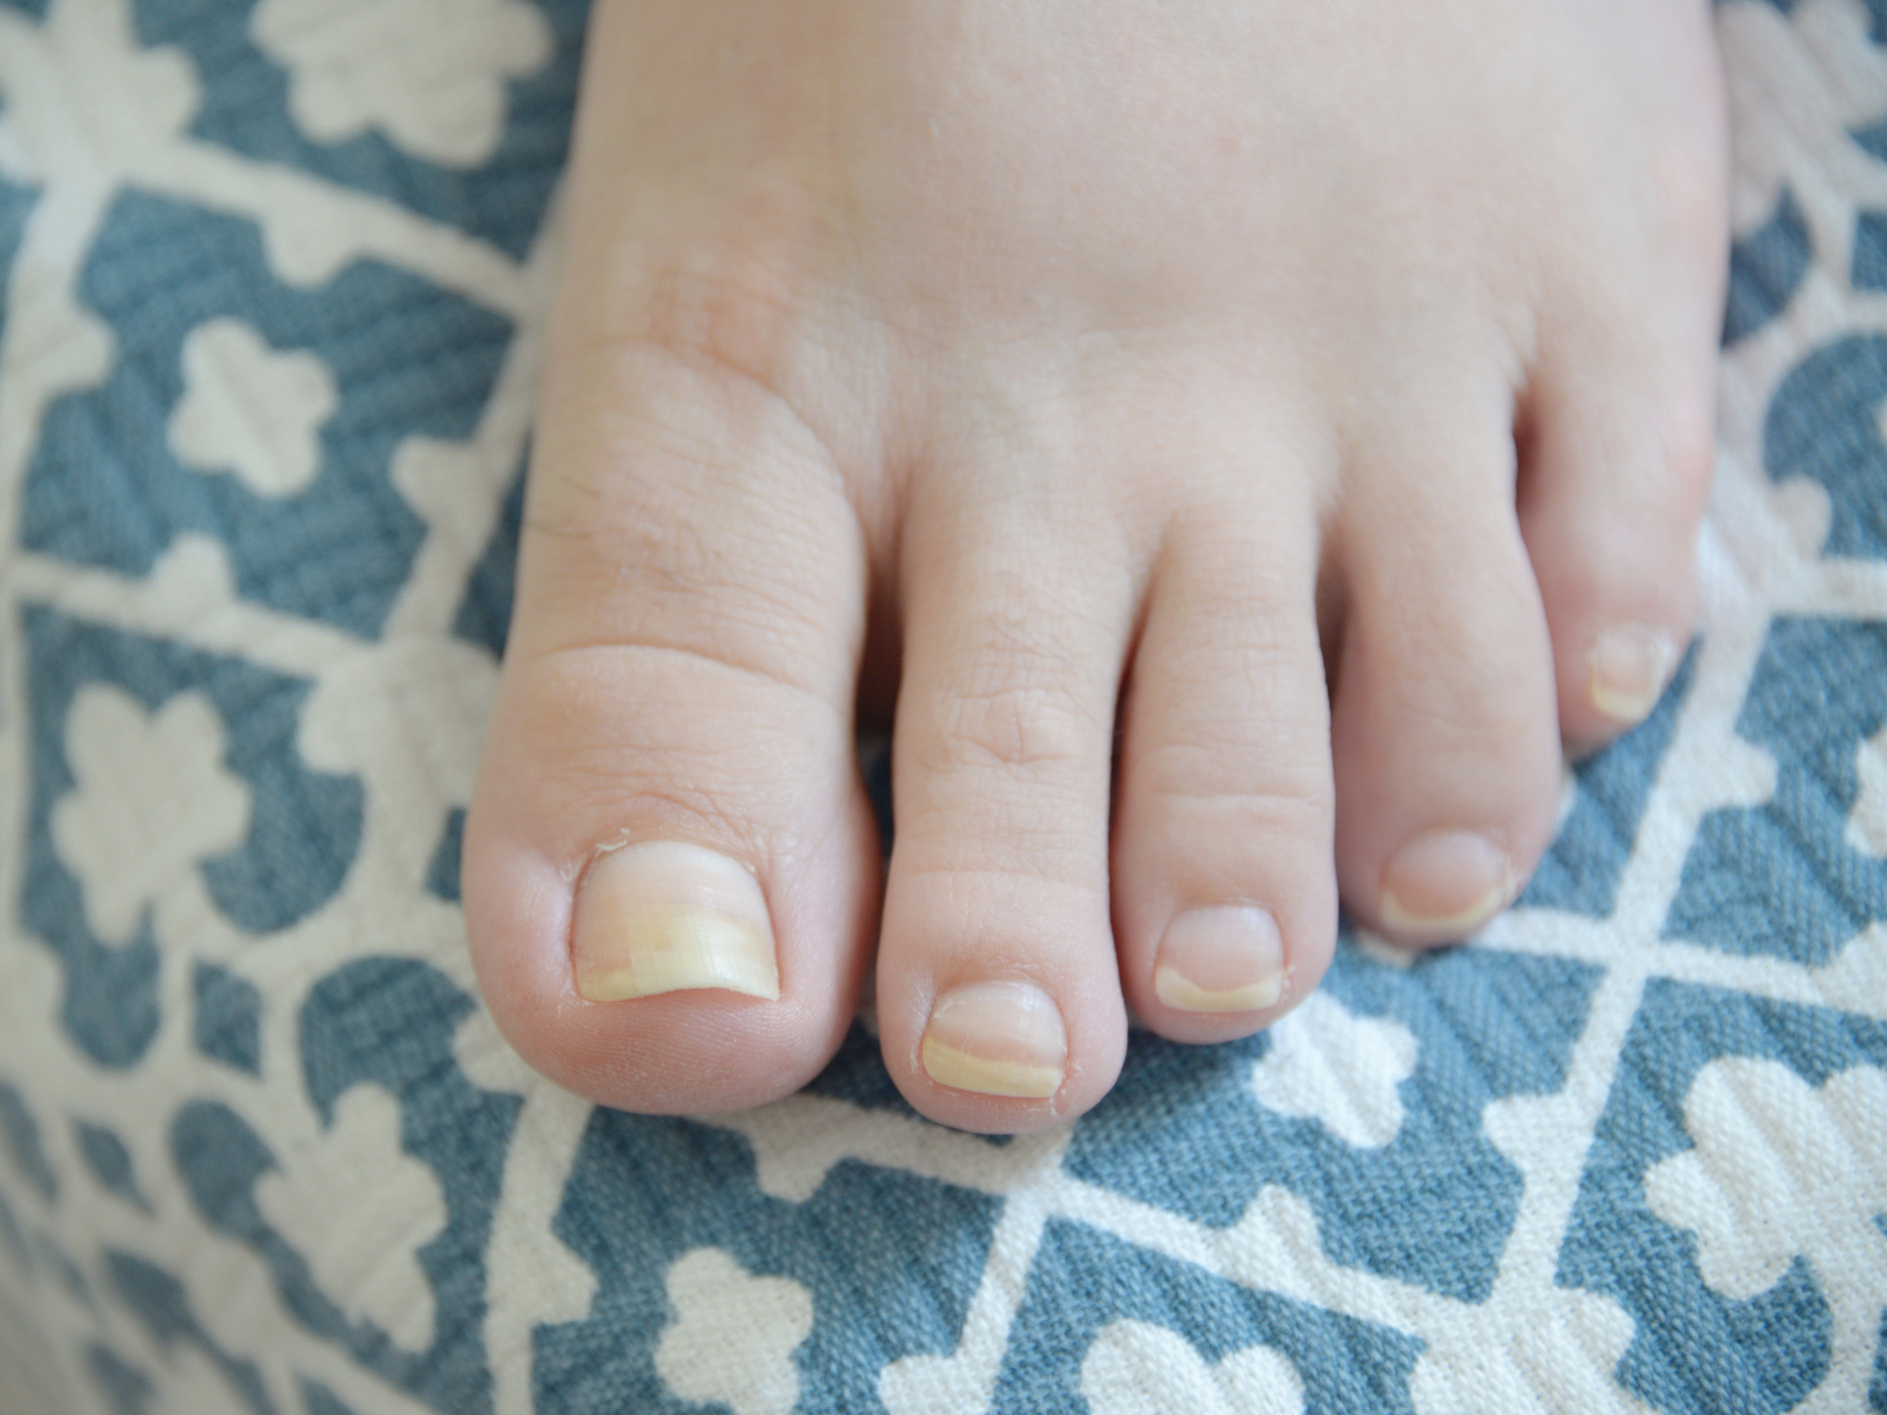 3. White Toenails With Abstract Design - wide 3